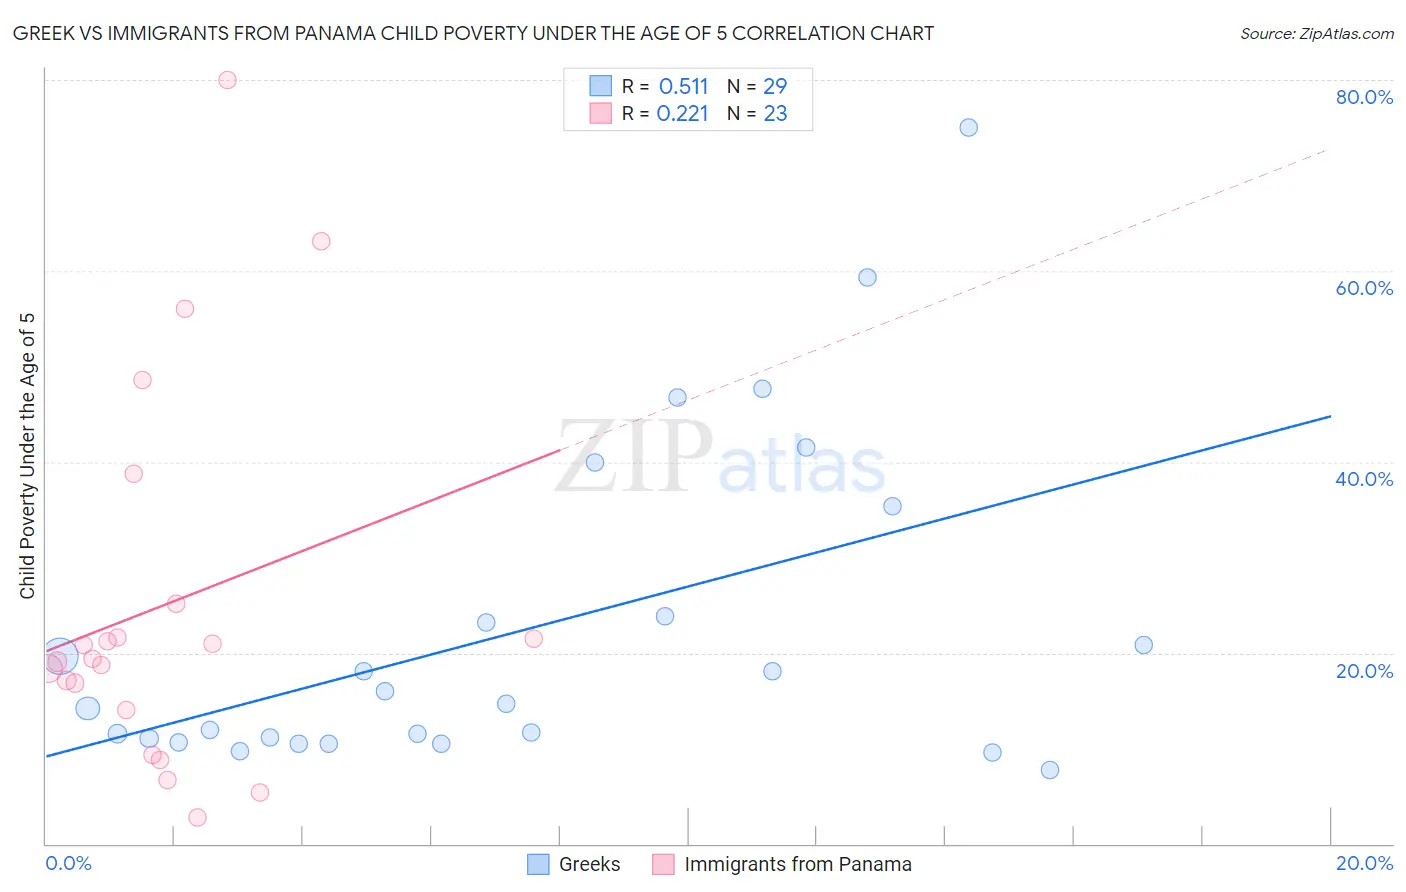 Greek vs Immigrants from Panama Child Poverty Under the Age of 5